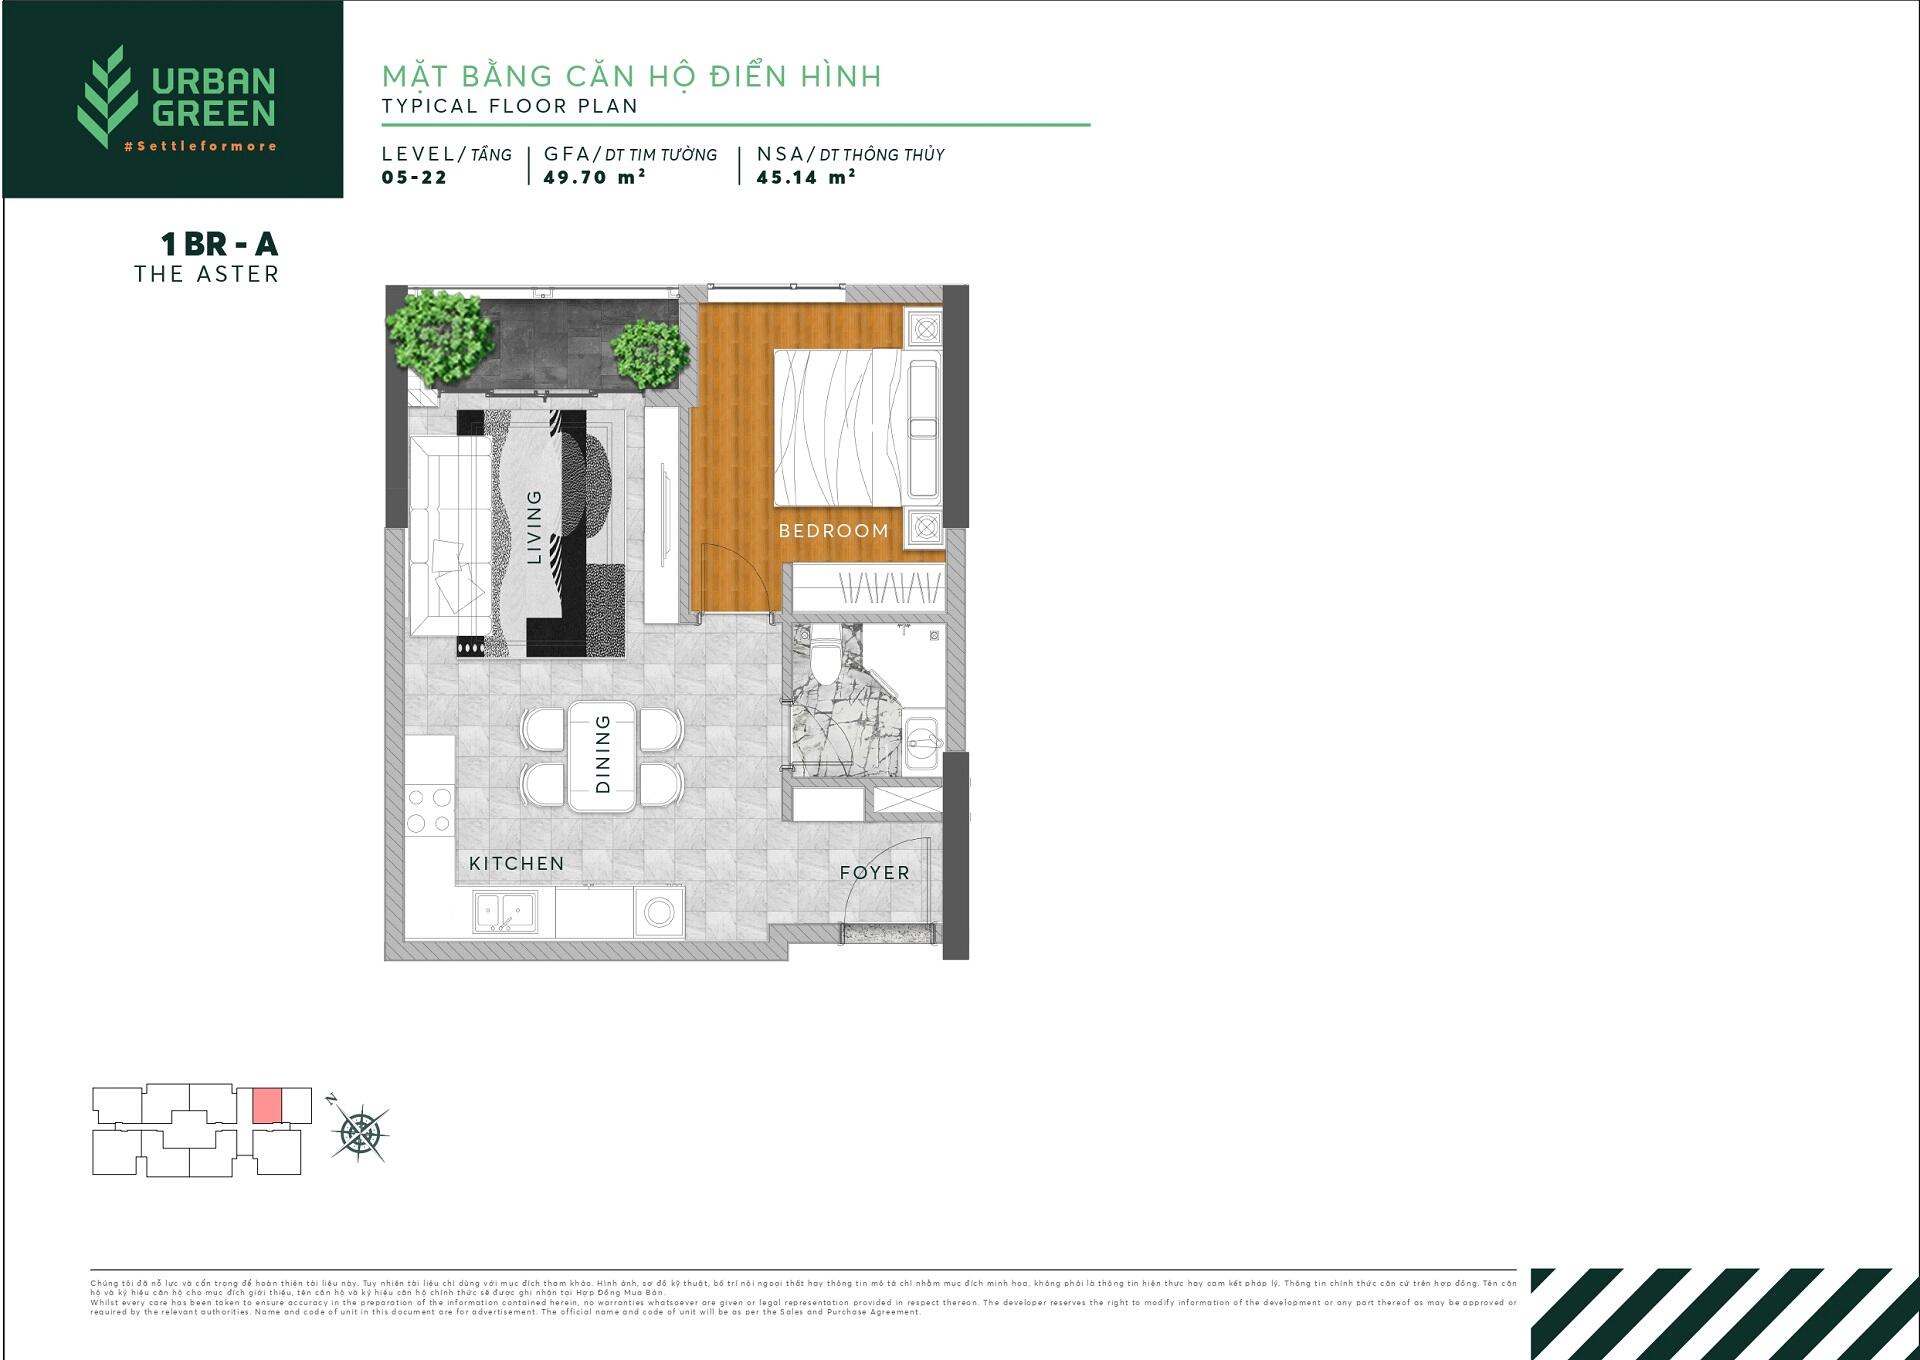 Floor plan of The Aster apartment 1 bedroom 1BR - A